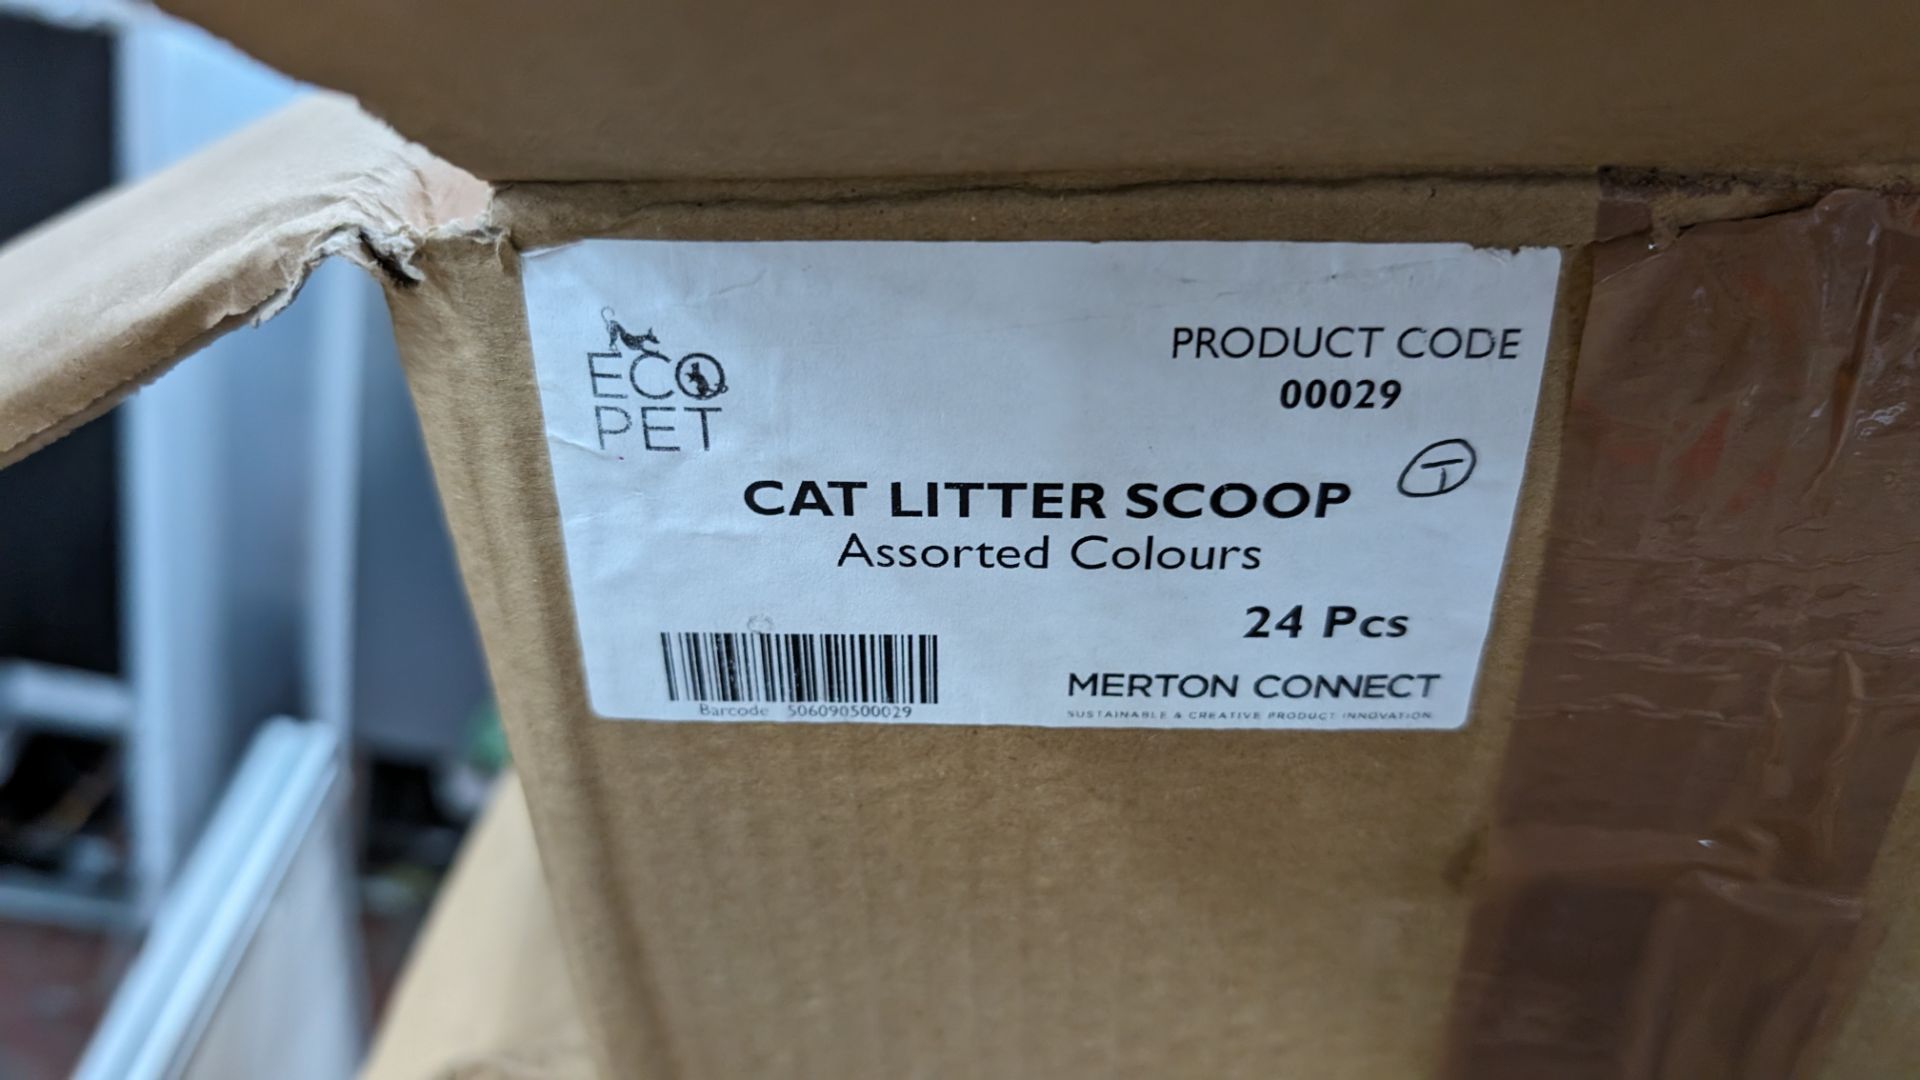 Approximately 144 off cat litter scoops in assorted colours - 6 cartons - Image 10 of 10